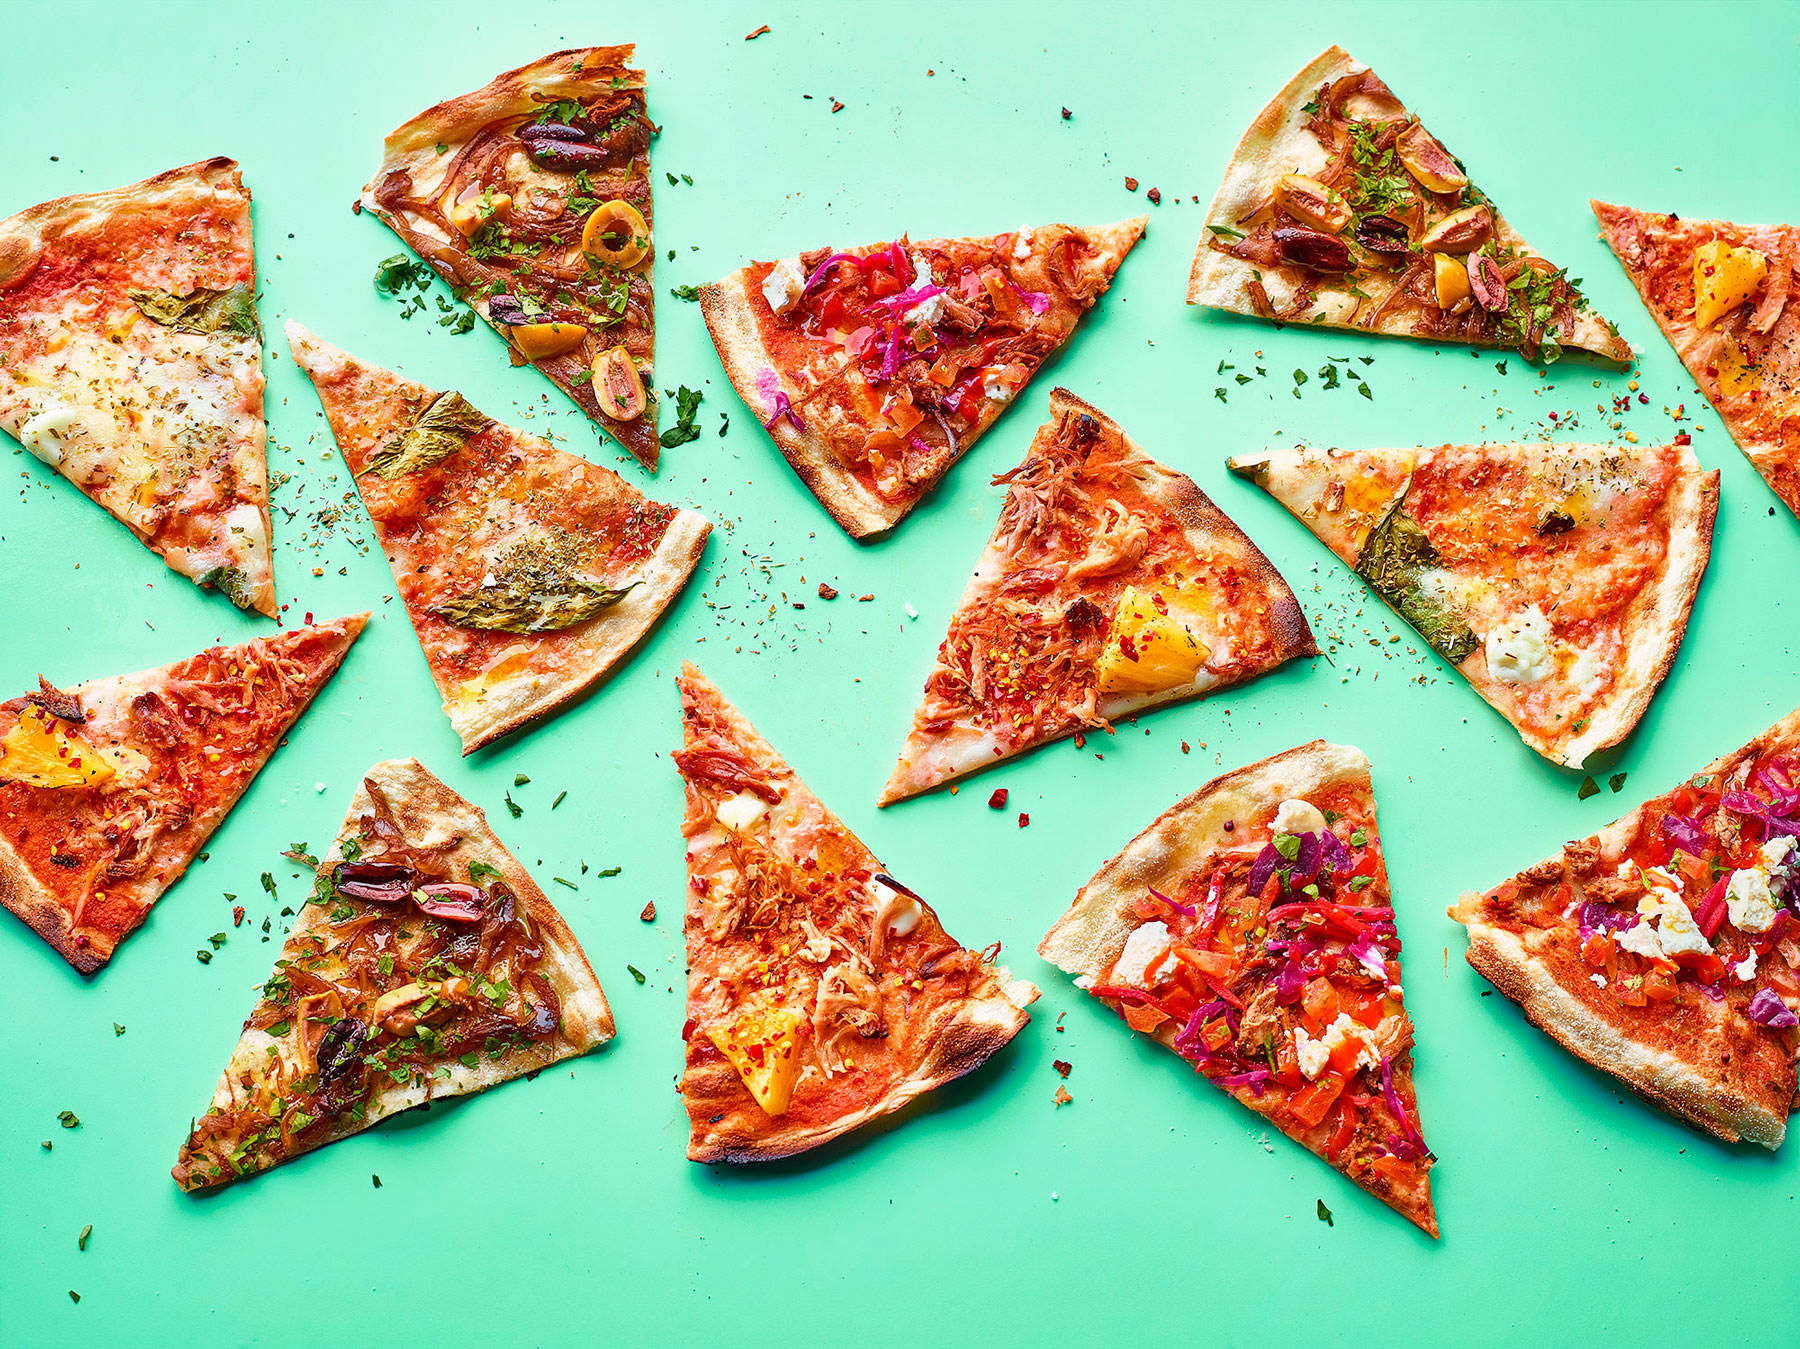 Pizza slices arranged graphically on a vibrant green background - London Food & Drinks Photographer